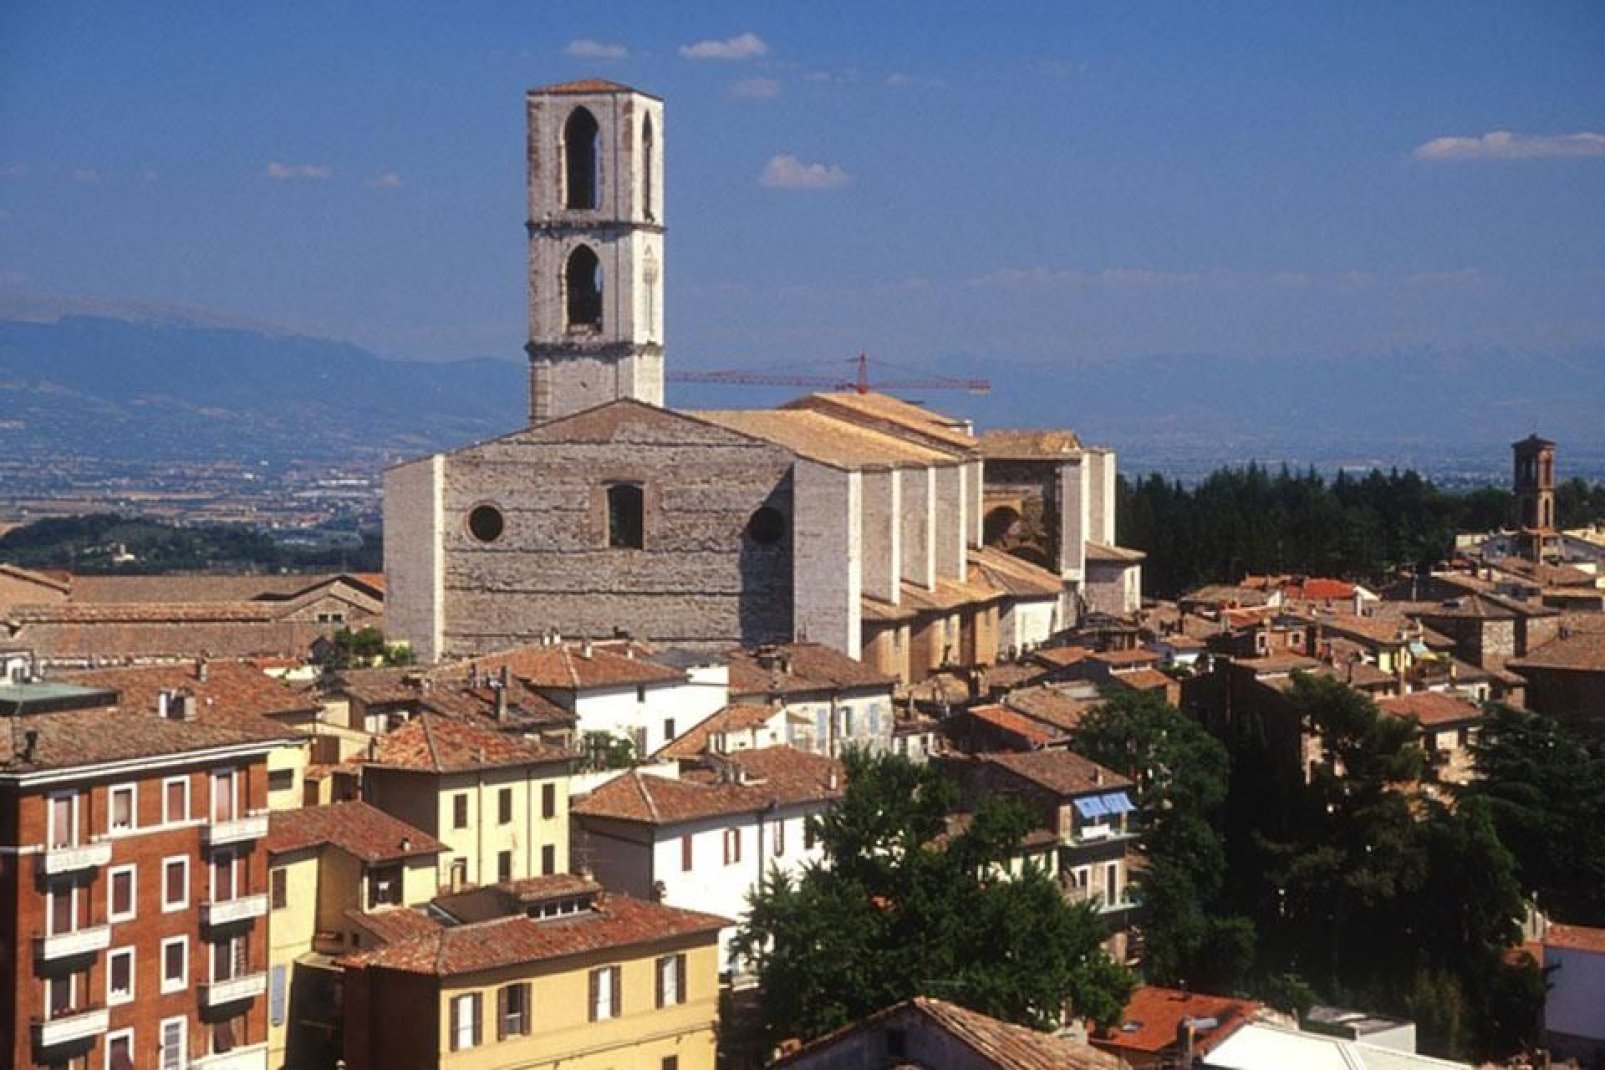 The capital city of the region of Umbria, Perugia is a city of art very that is rich in history and monuments.